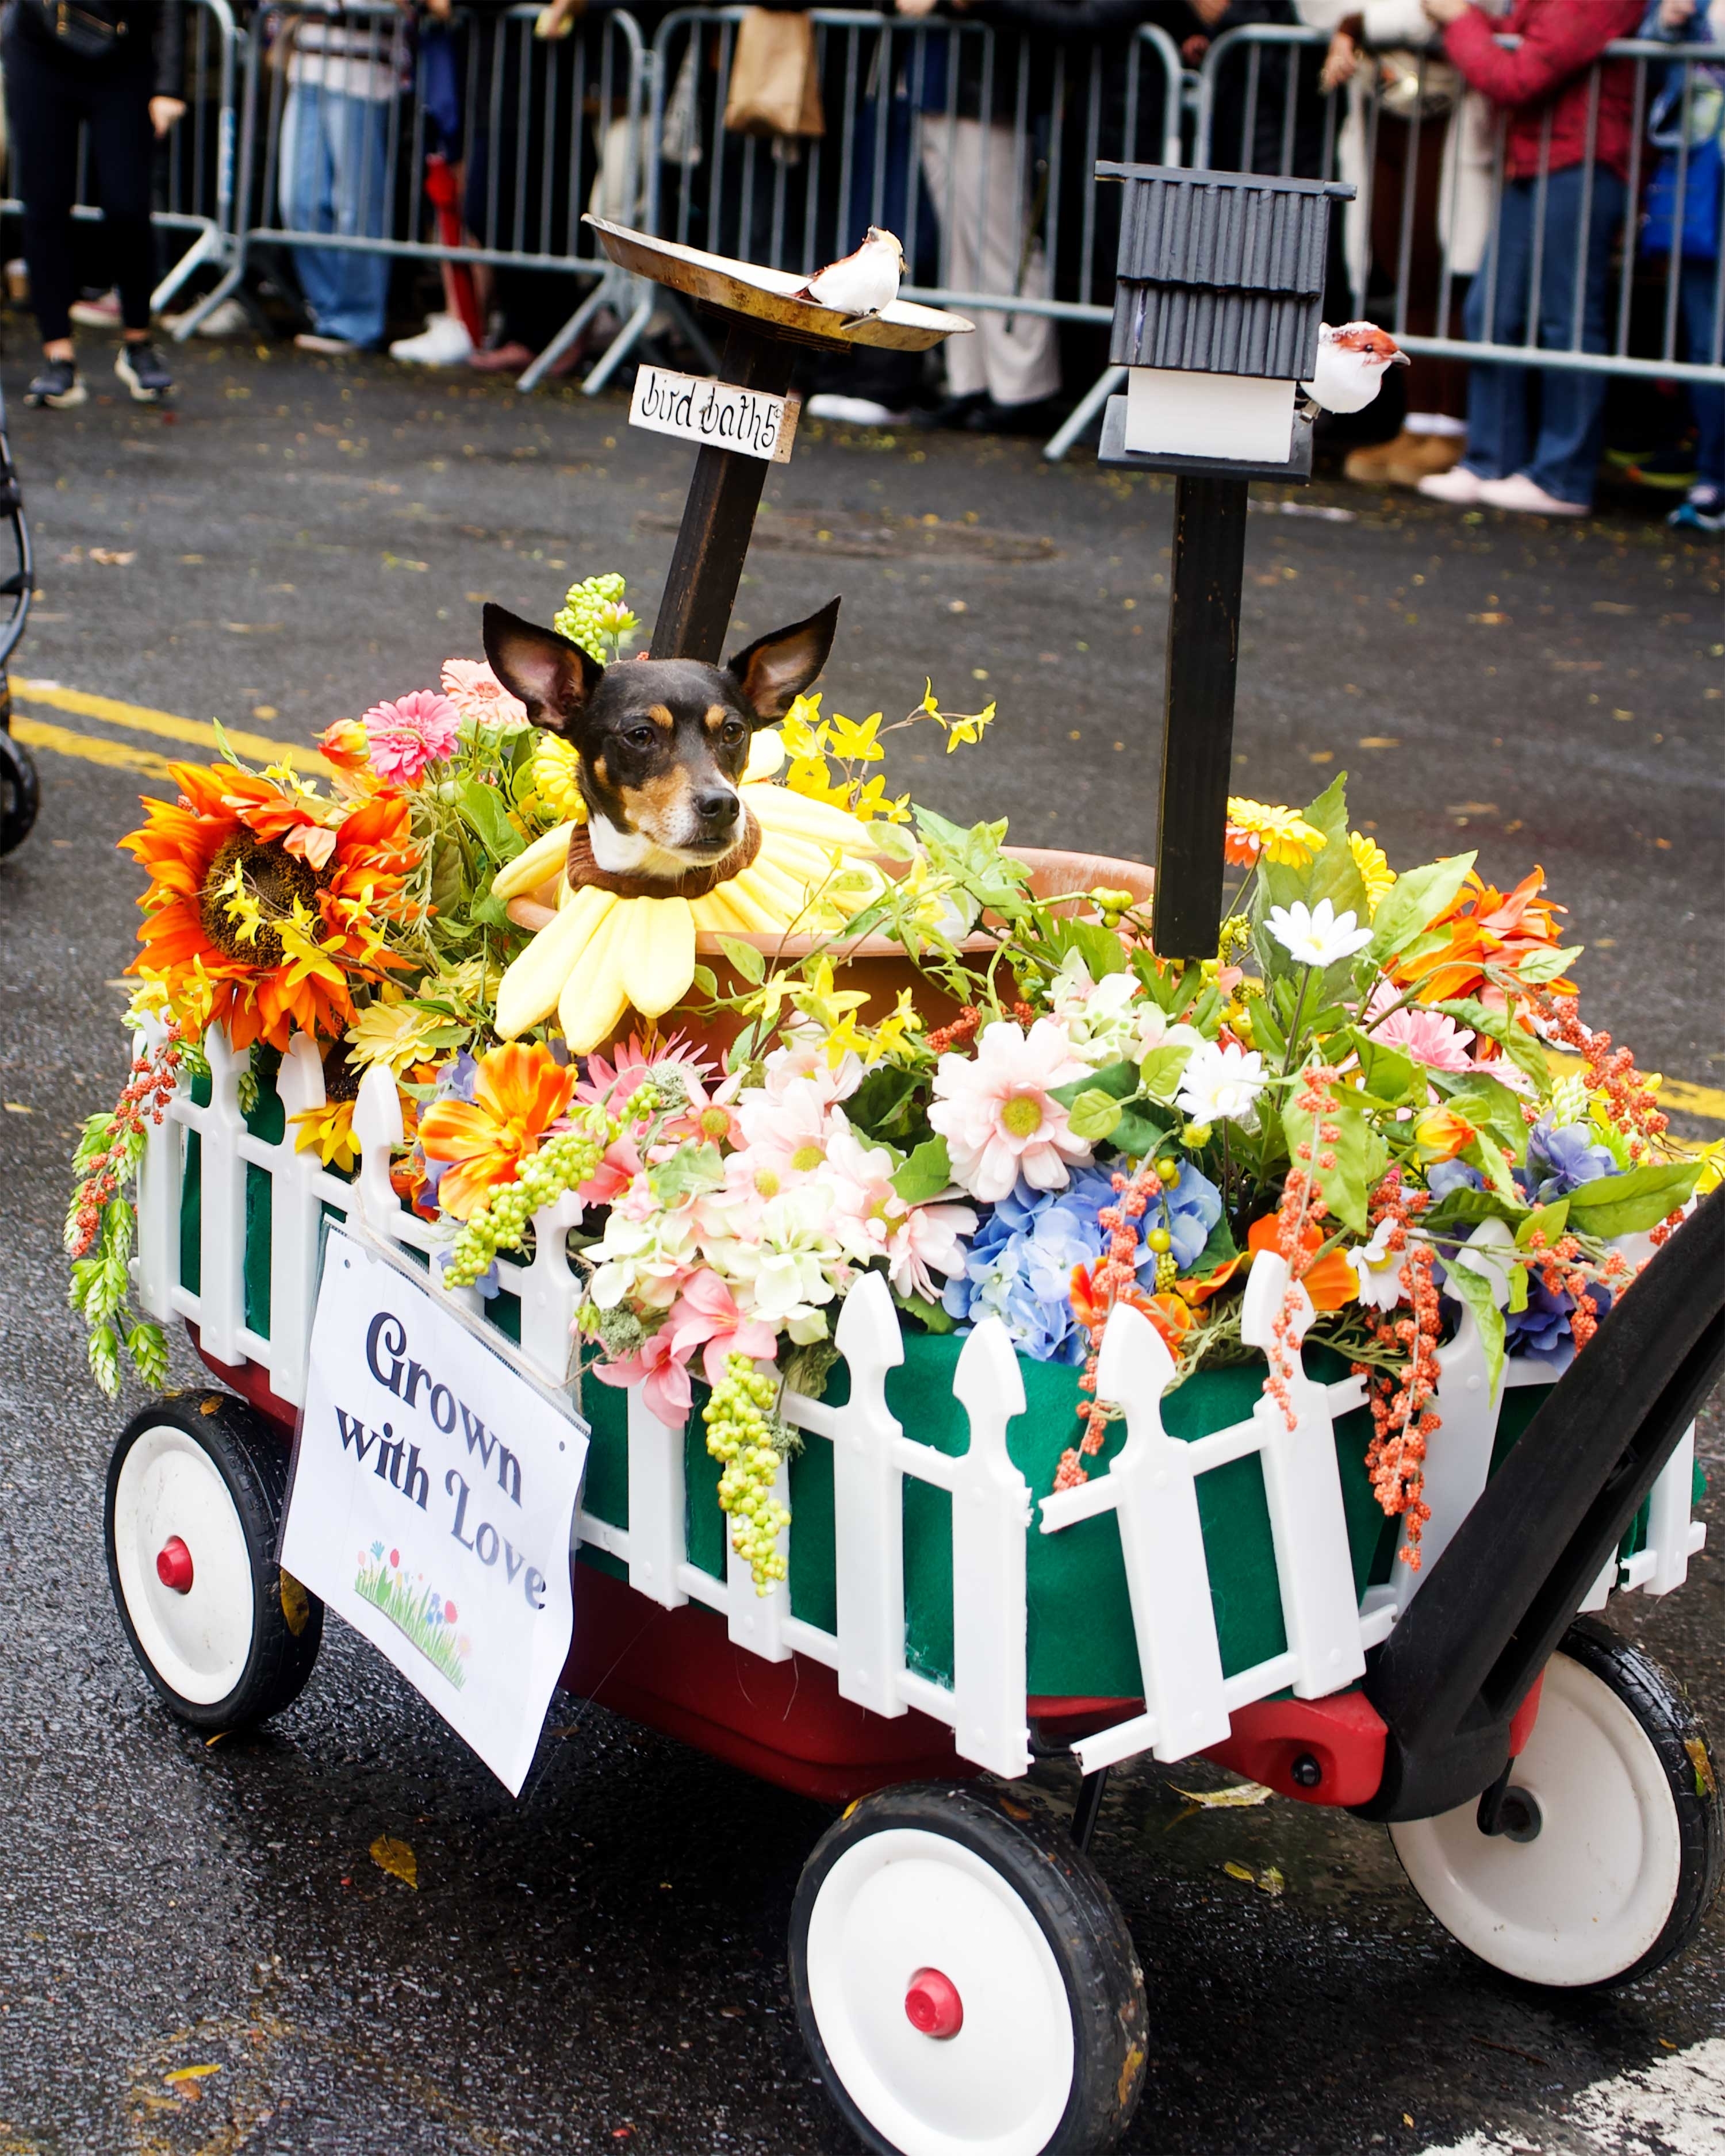 dog in a mobile cart filliwed with flowers with a sign that sats grown with love